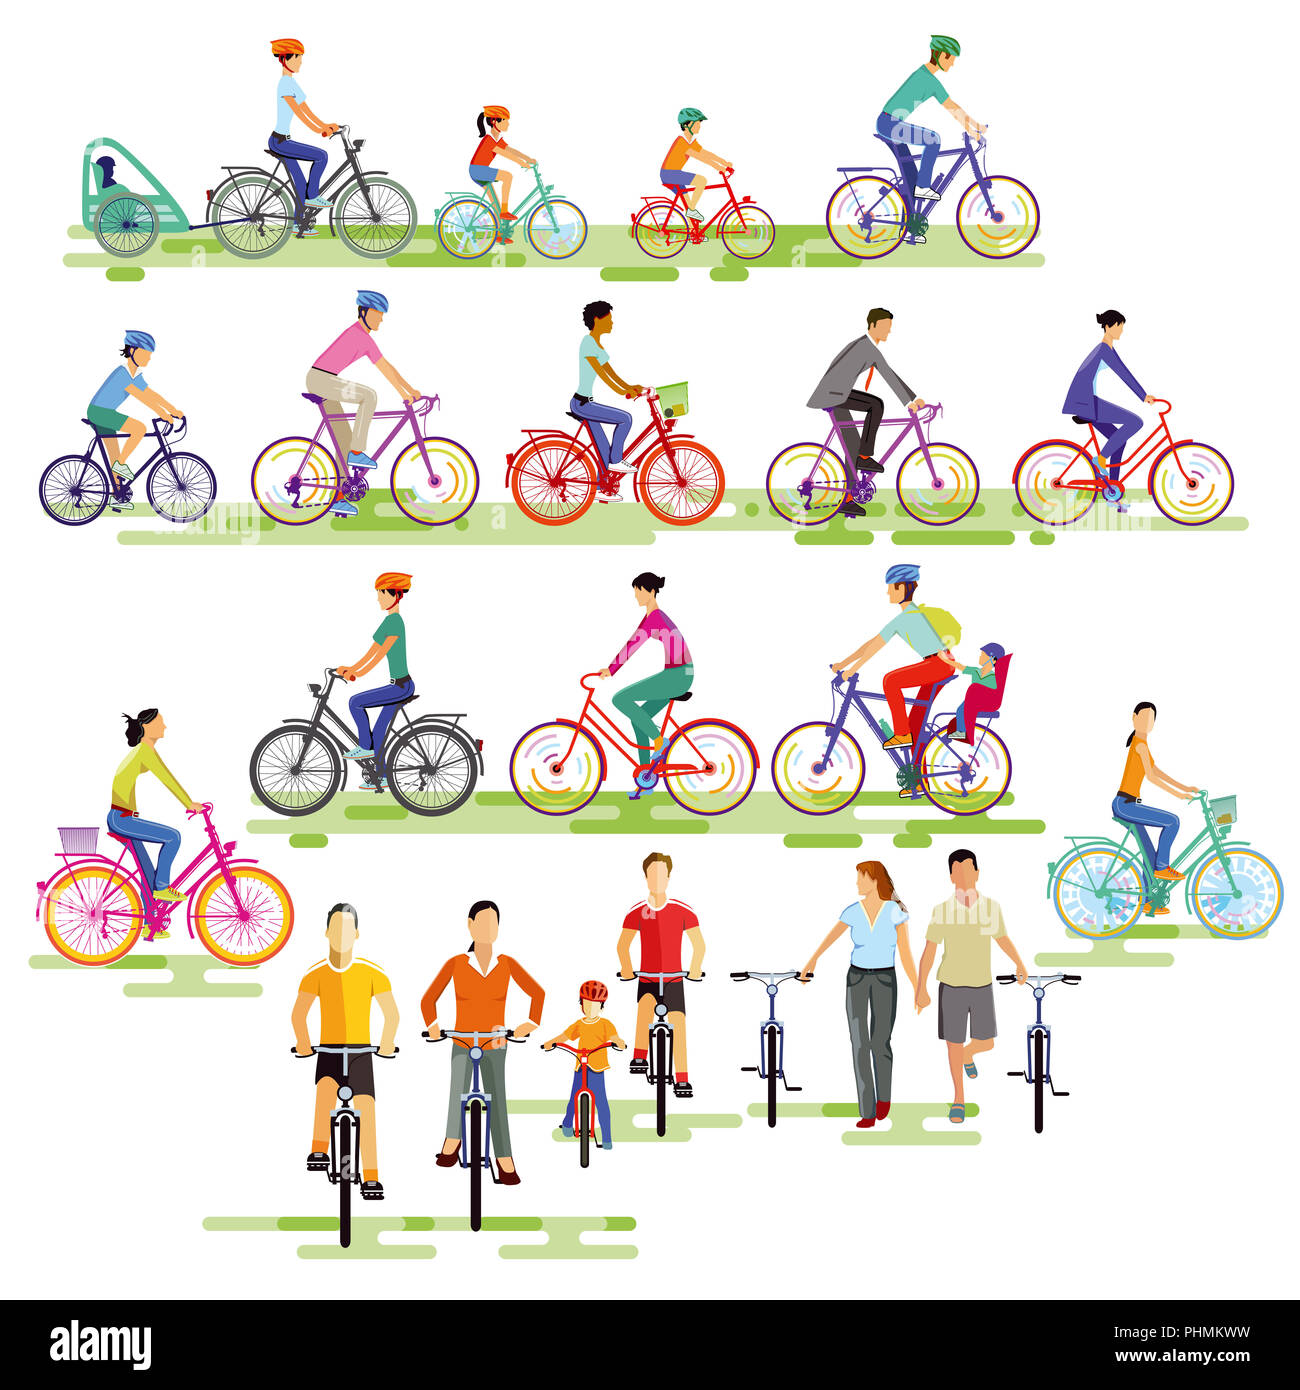 large group of cyclists, illustration Stock Photo